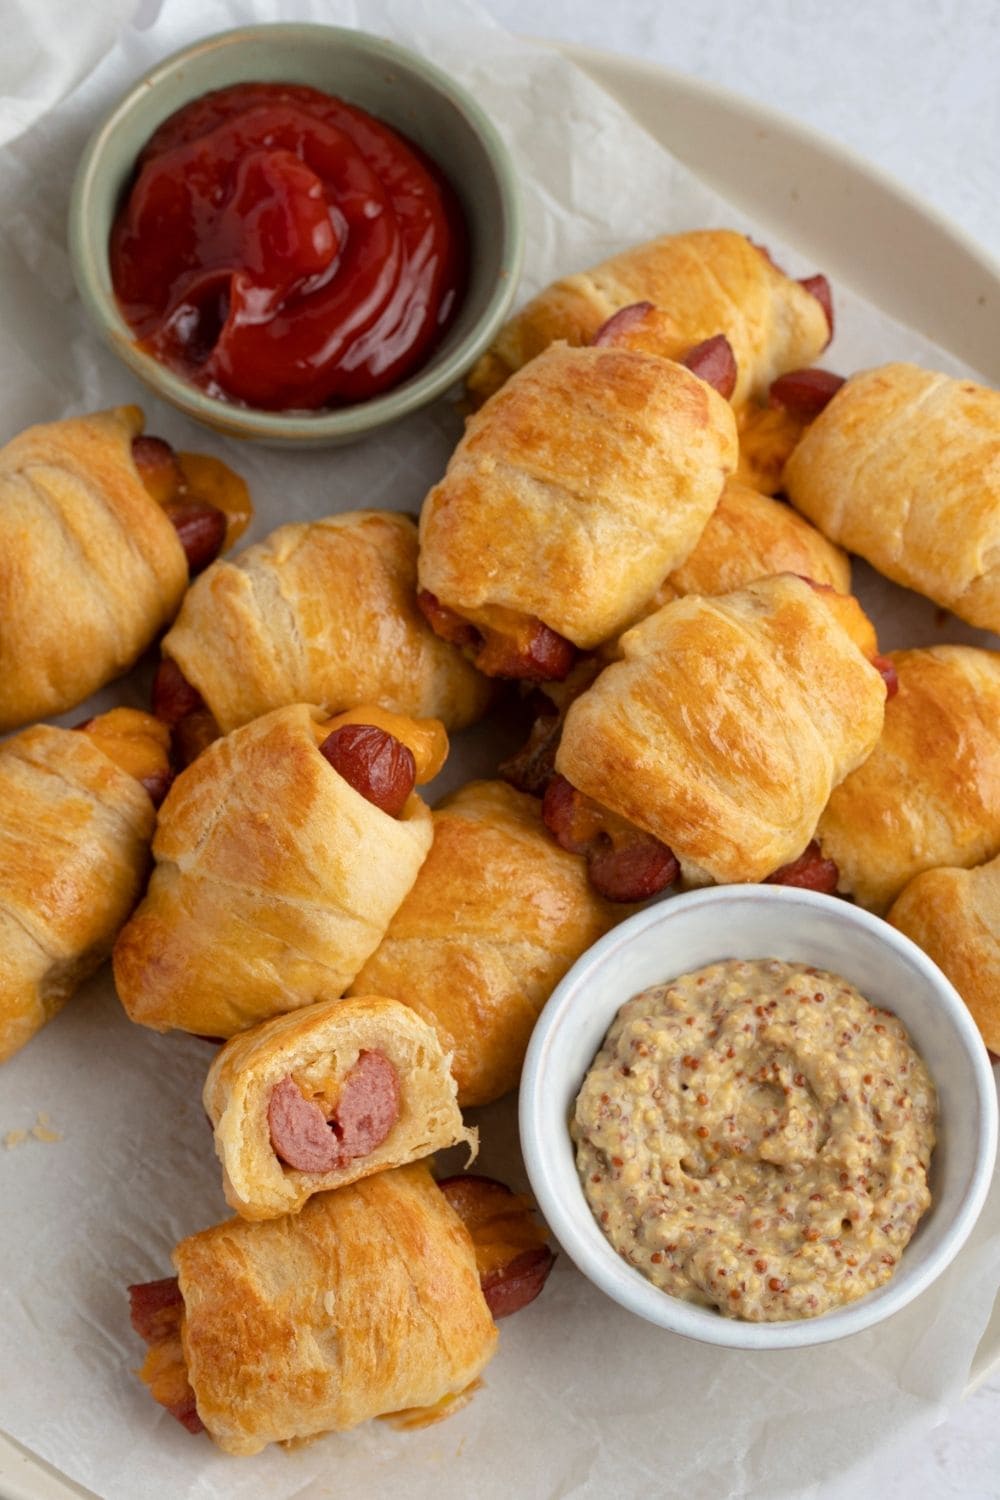 Bunch of pigs in a blanket with dipping sauces.